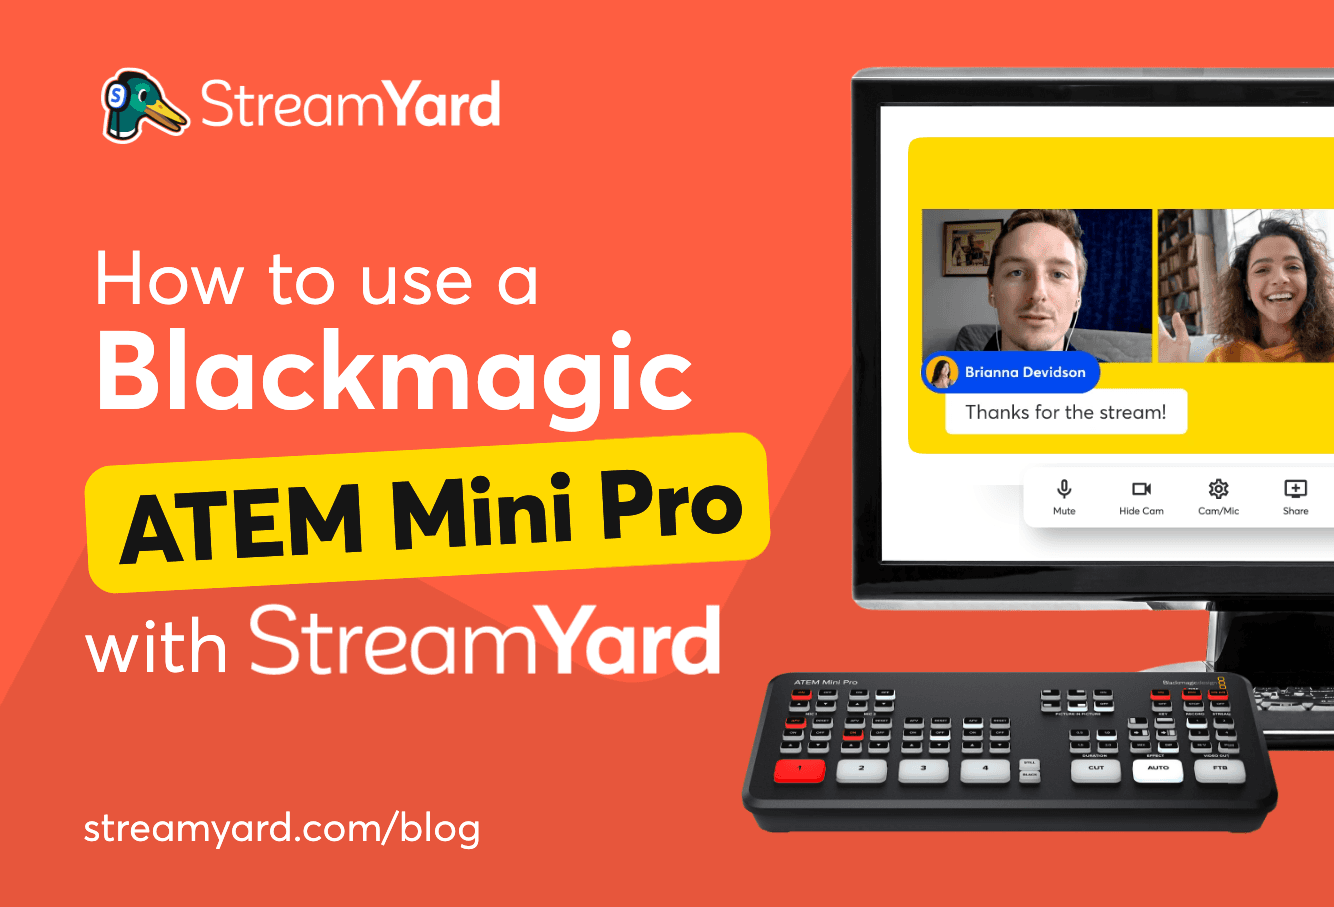 Learn how to use the Blackmagic ATEM Mini Pro with StreamYard to add multiple cameras, picture-in-picture and more when live streaming.